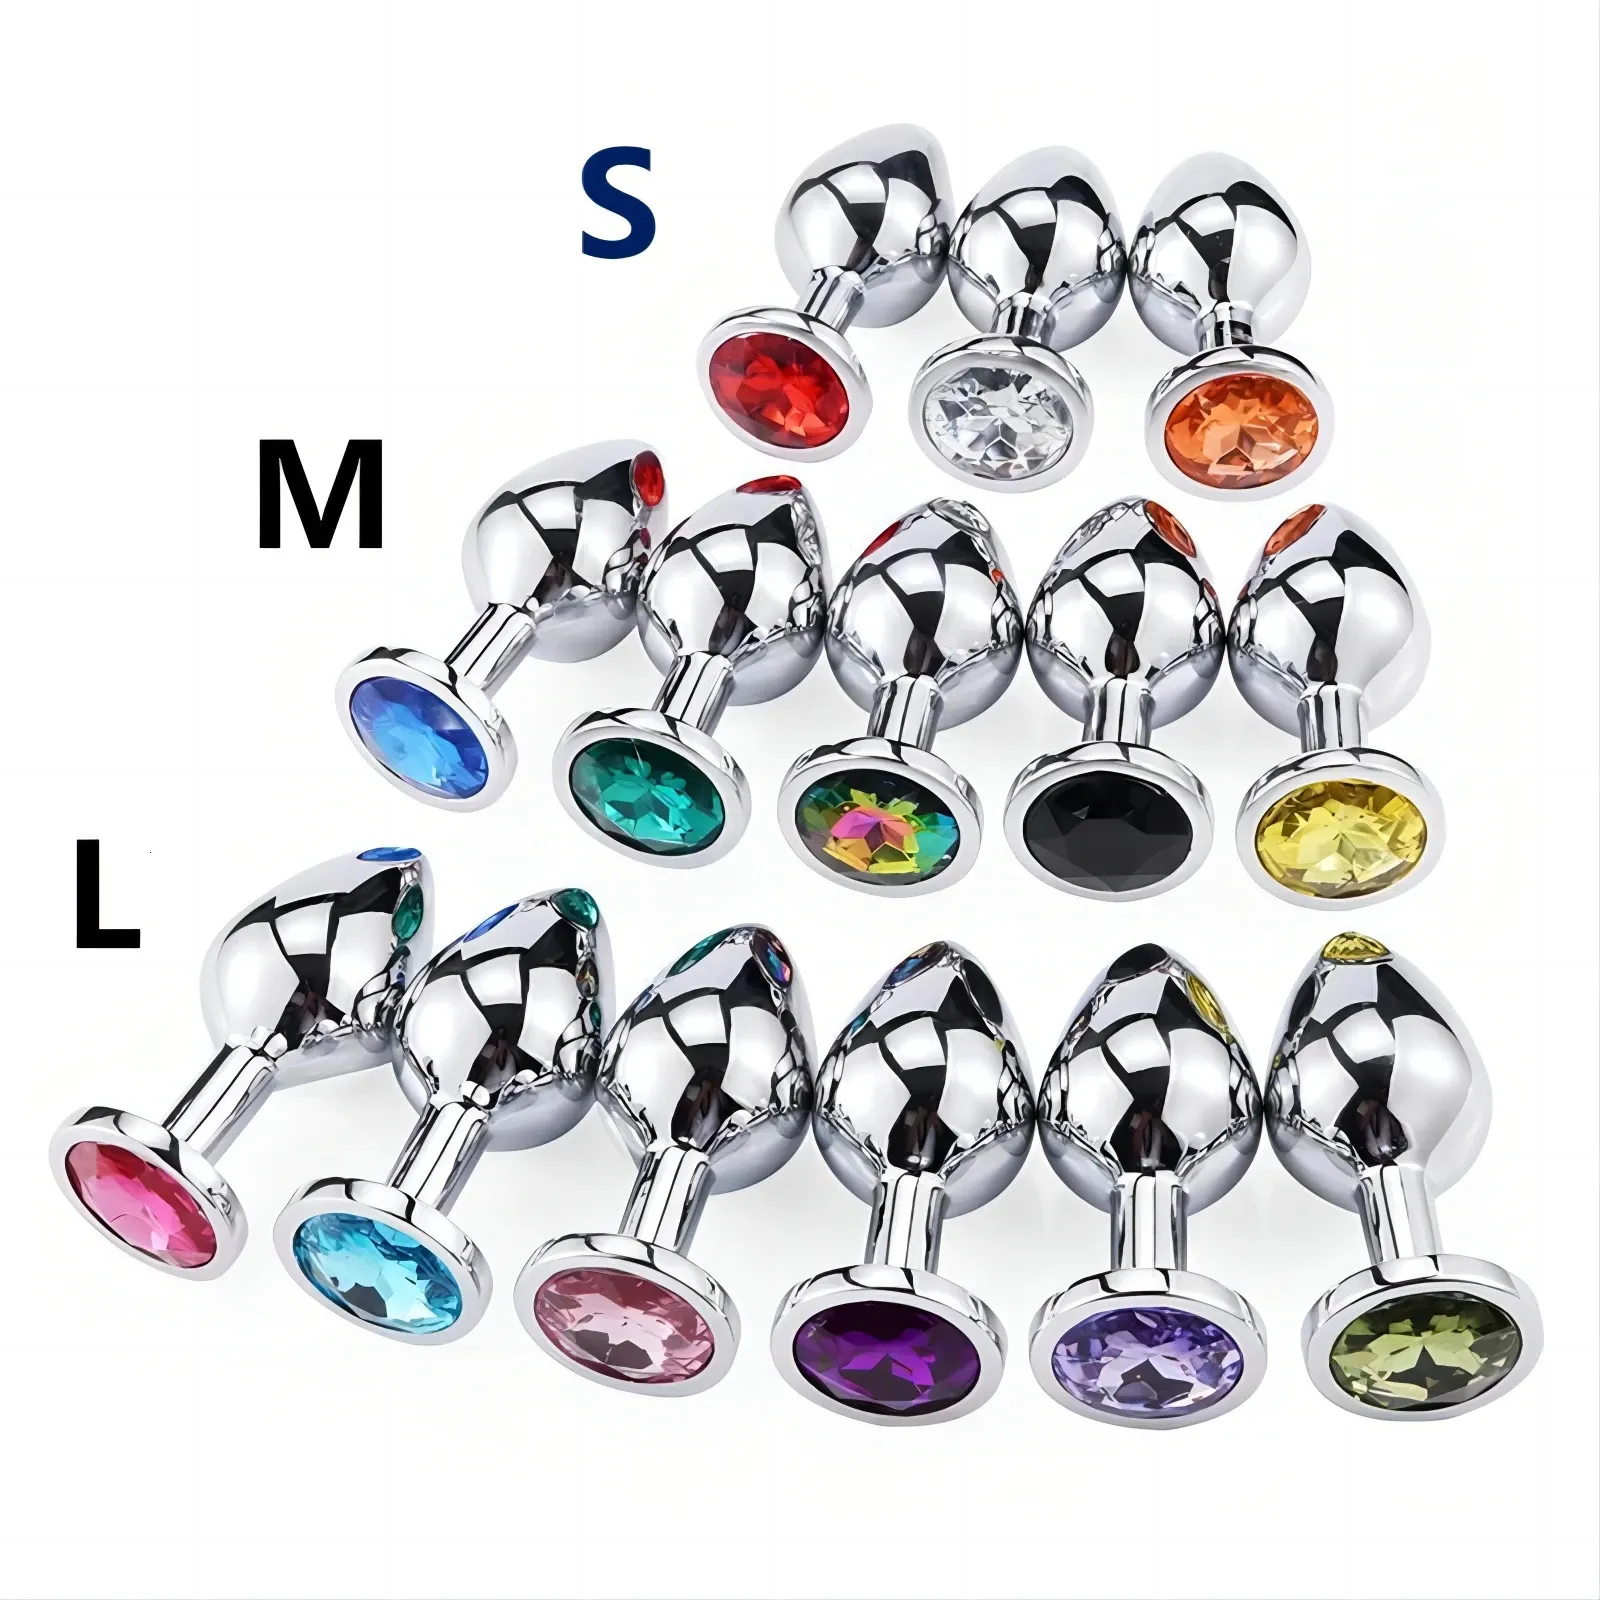 Adult Toys Anal Plug Sex Toys Mini Round Shaped Metal Stainless Smooth Steel Butt Small Tail Female/Male Dildo Intimate Goods 231030